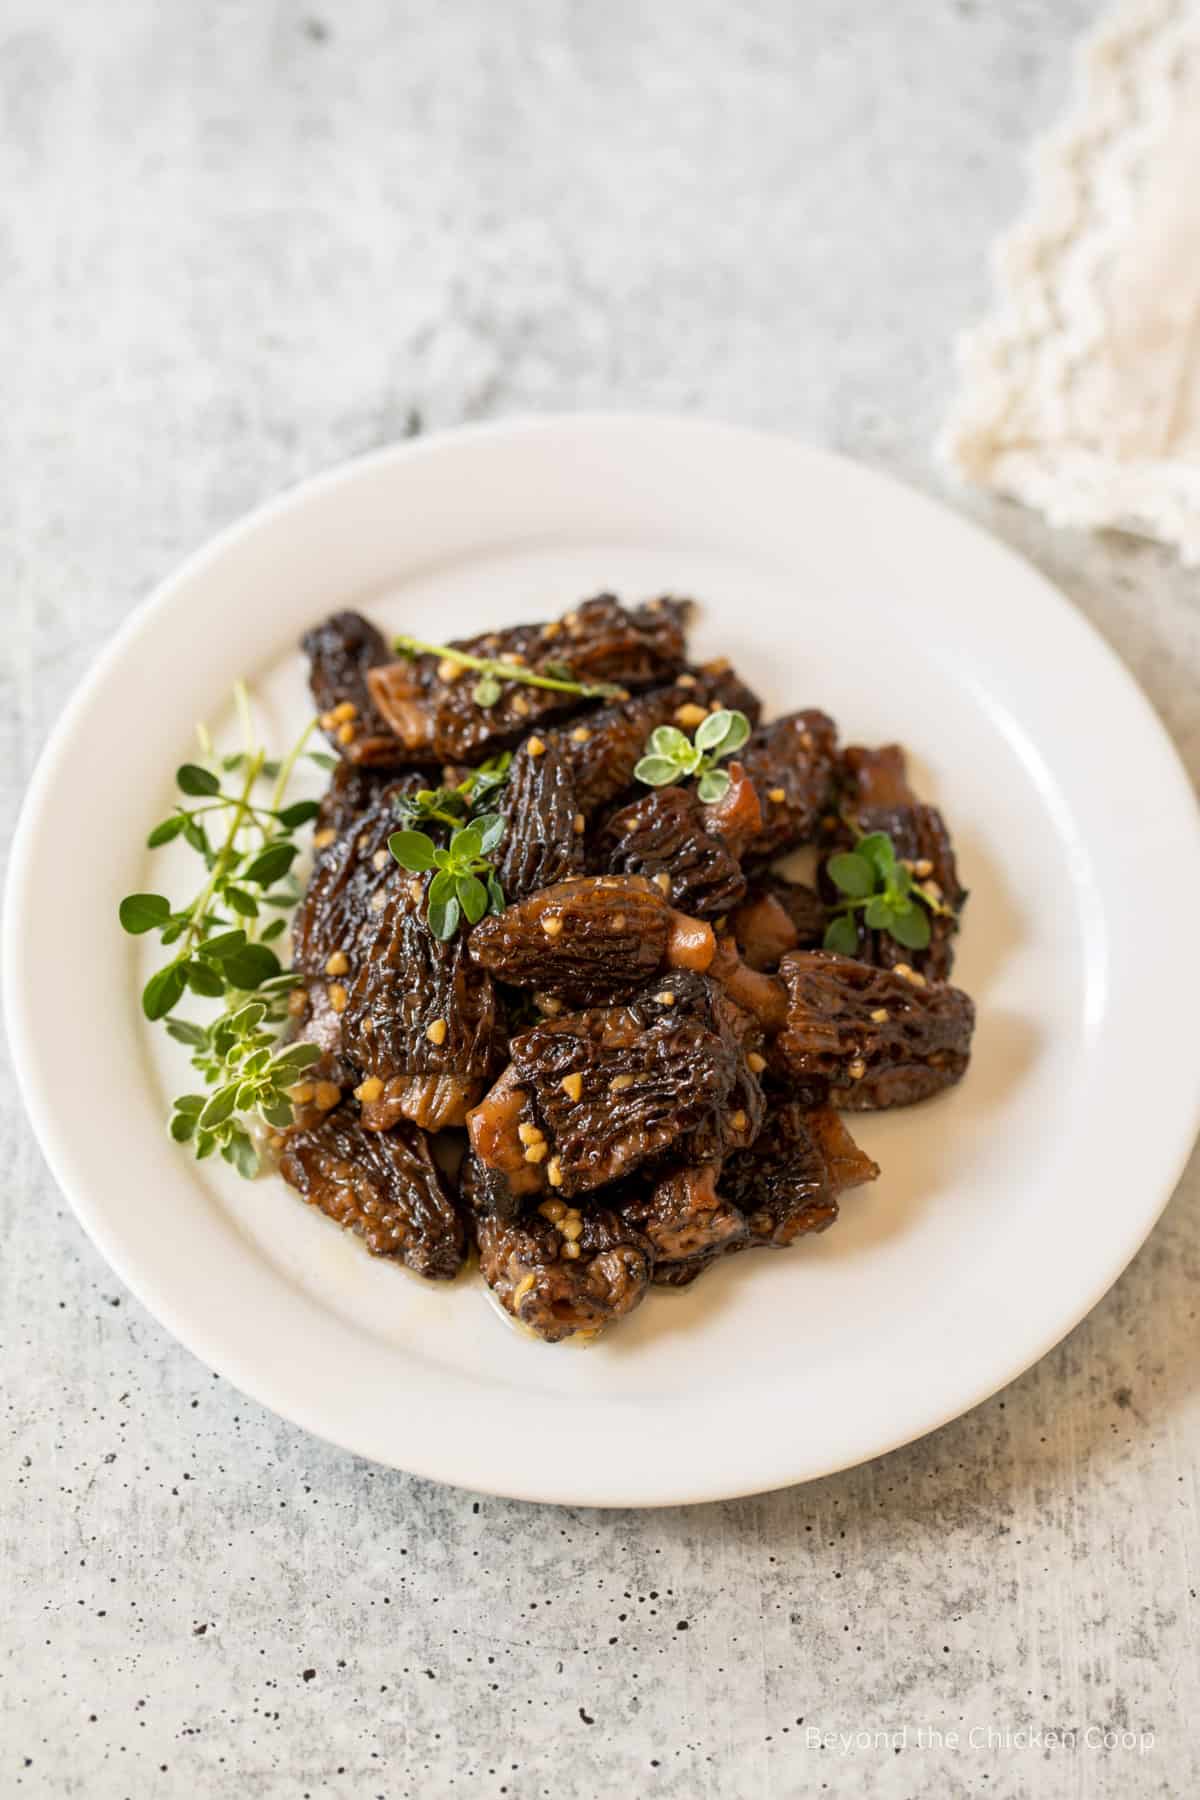 Cooked morels on a plate with fresh thyme.